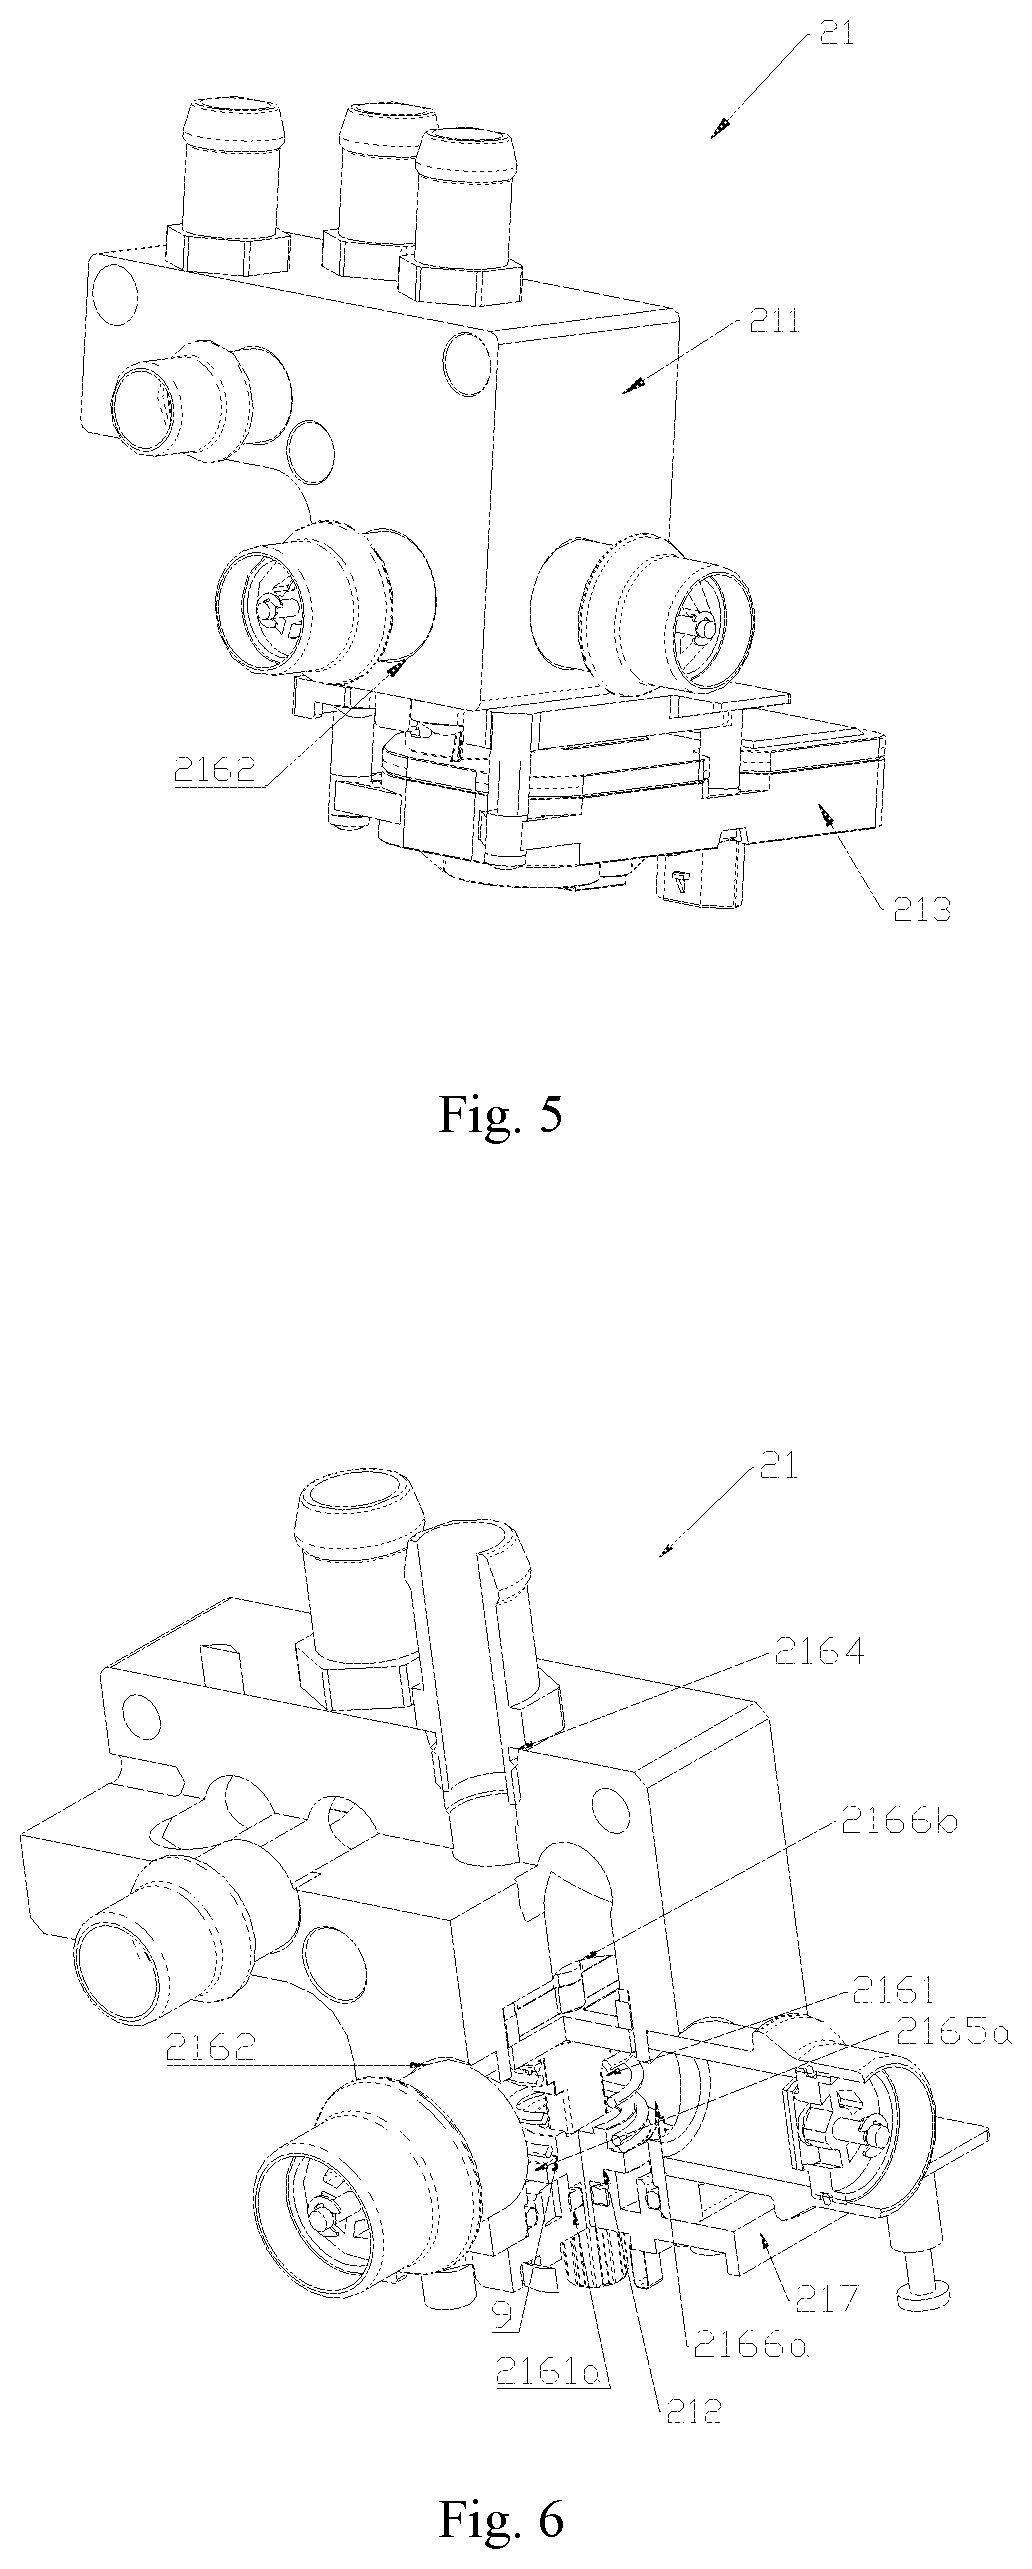 Fluid heat exchange assembly, and heat management system of vehicle